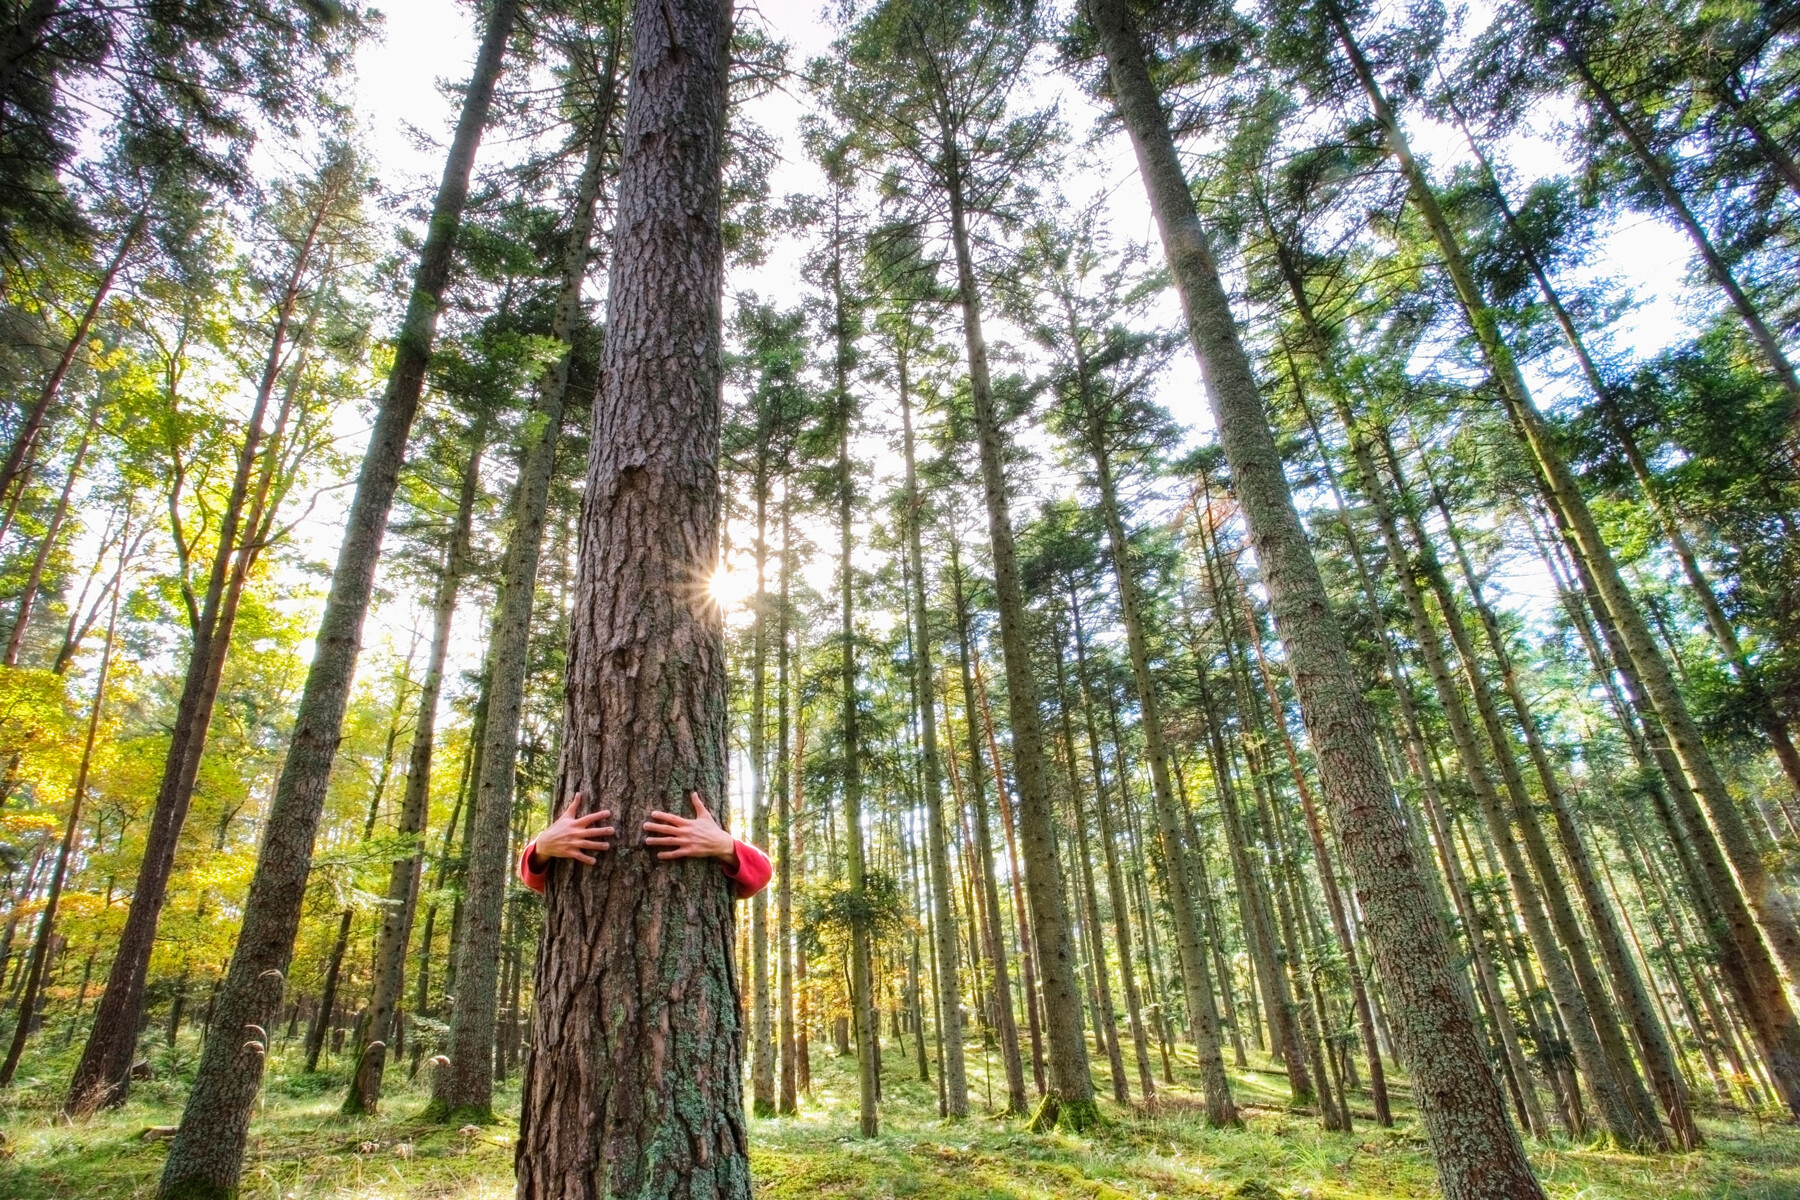 A man hugs a tree in a forest.